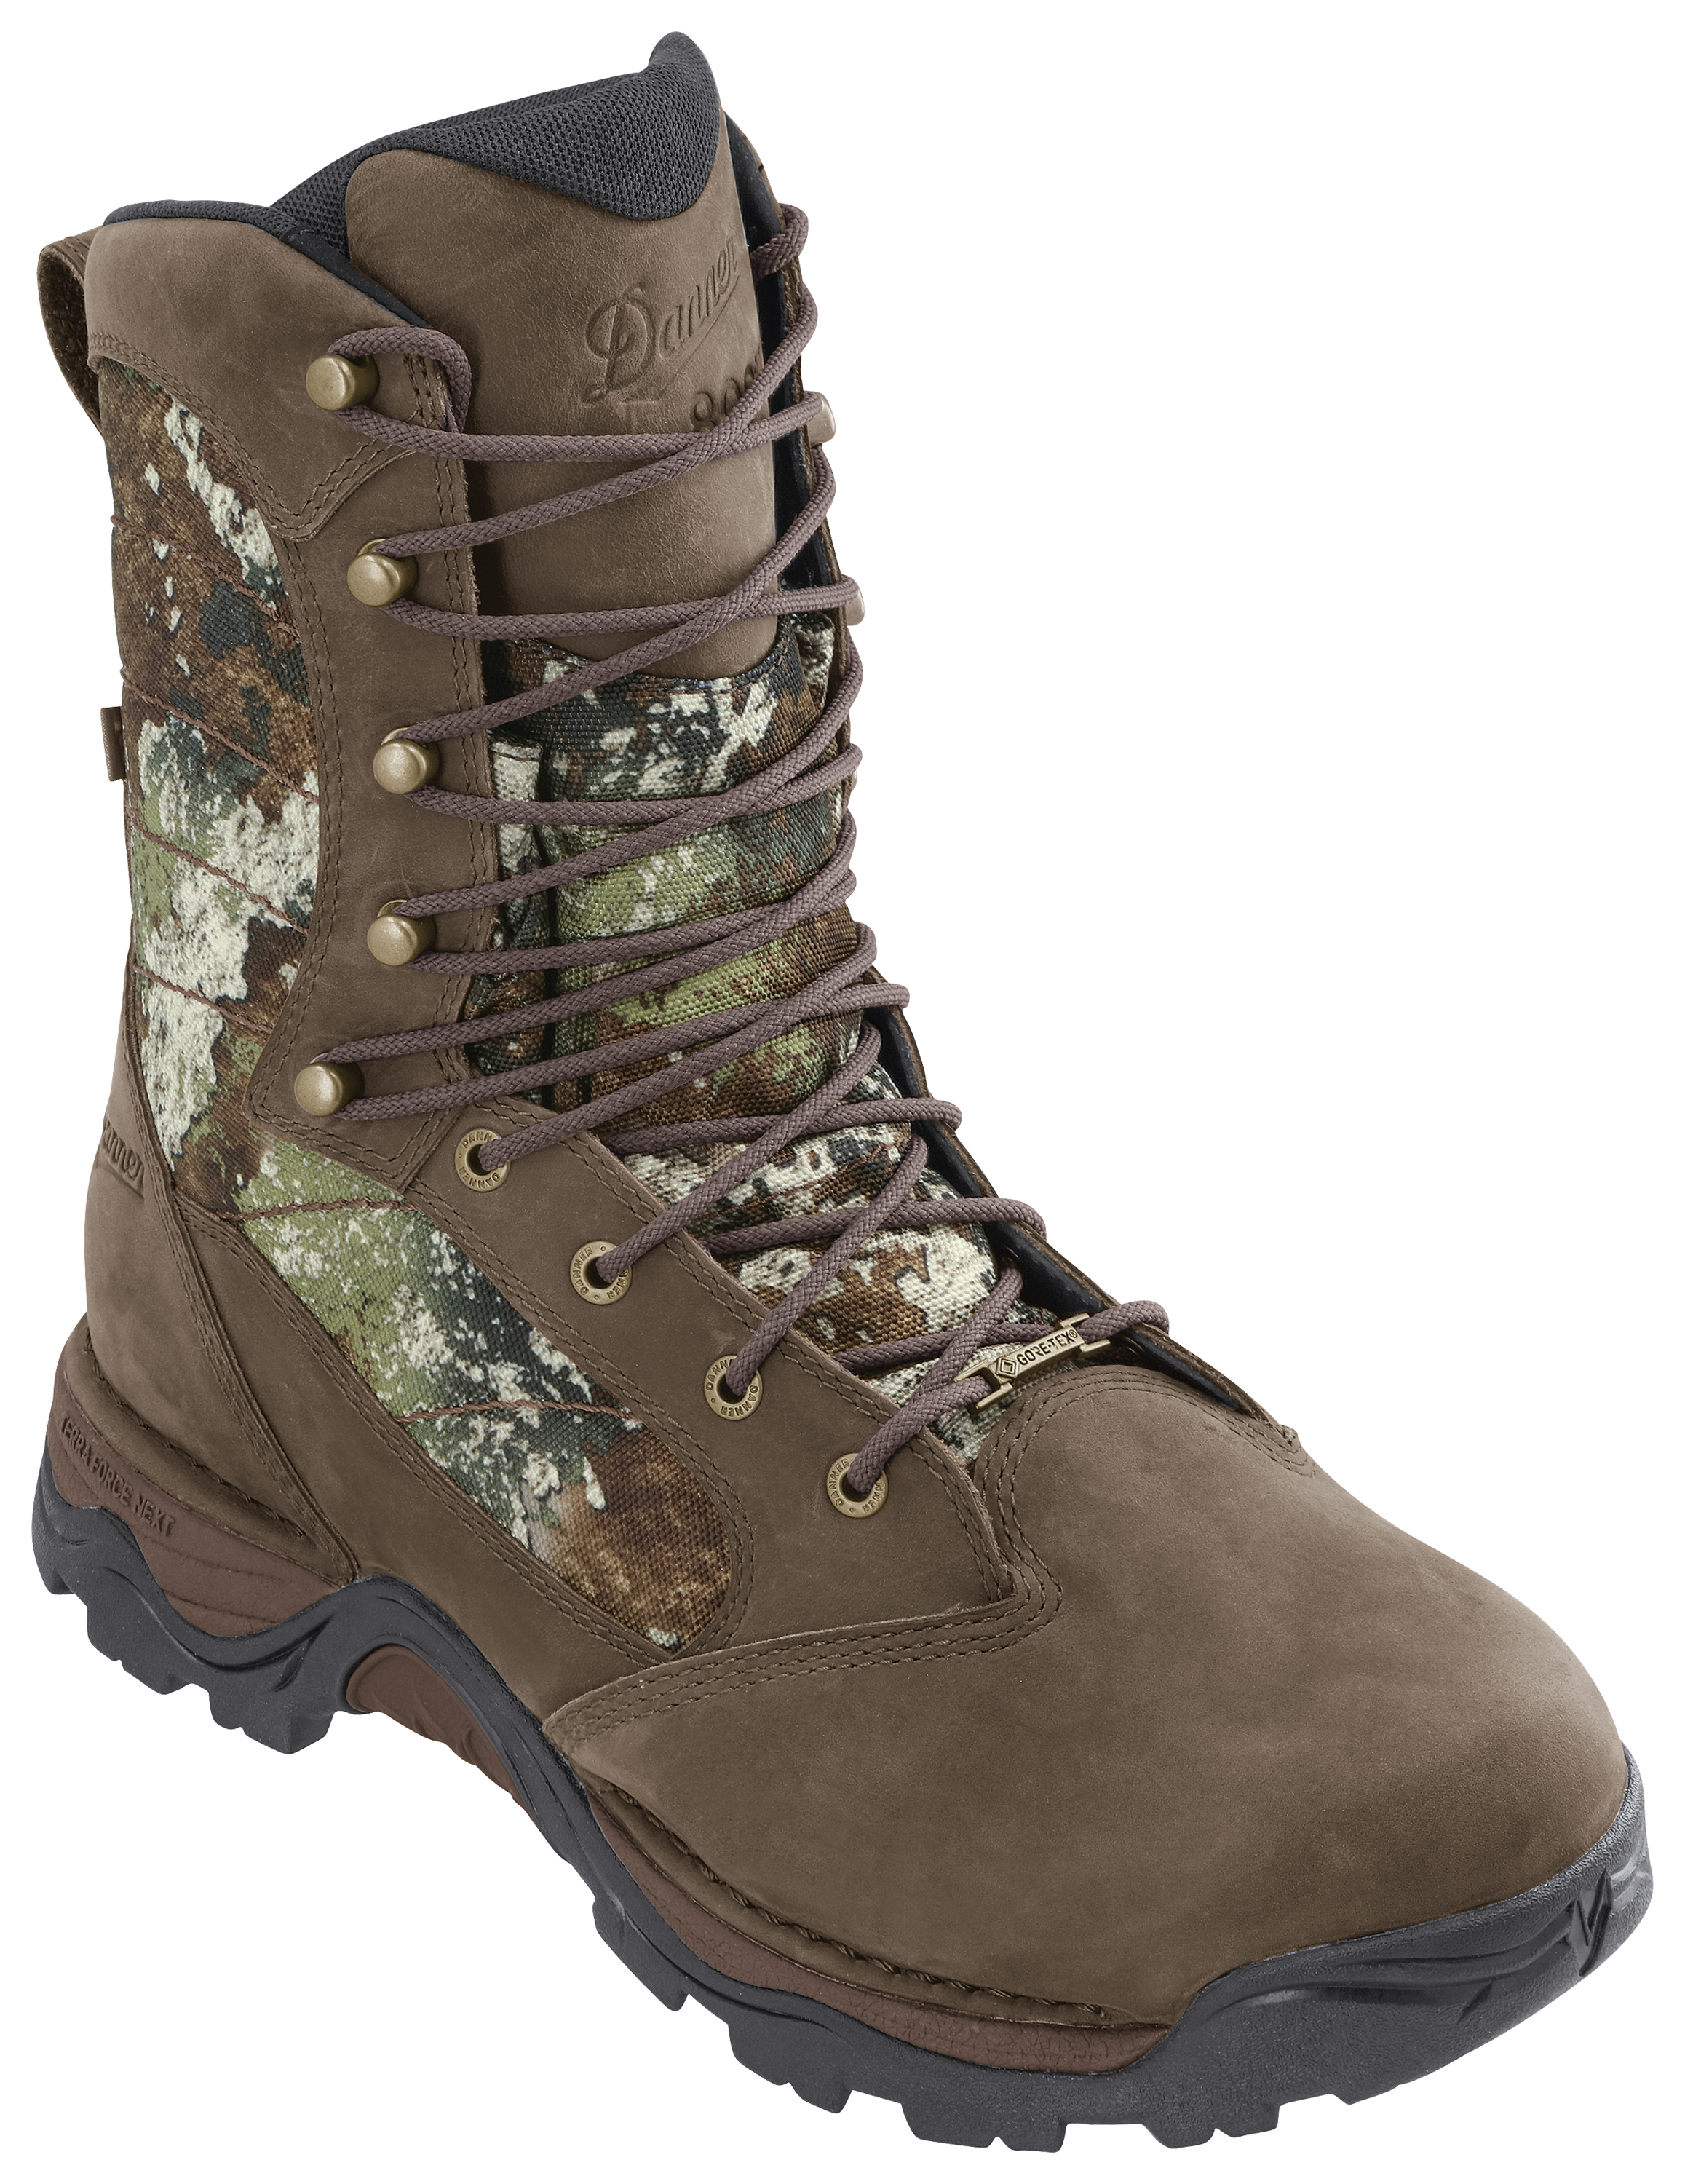 Danner Pronghorn 800 TrueTimber Strata Insulated GORE-TEX Hunting Boots for Men - 9W